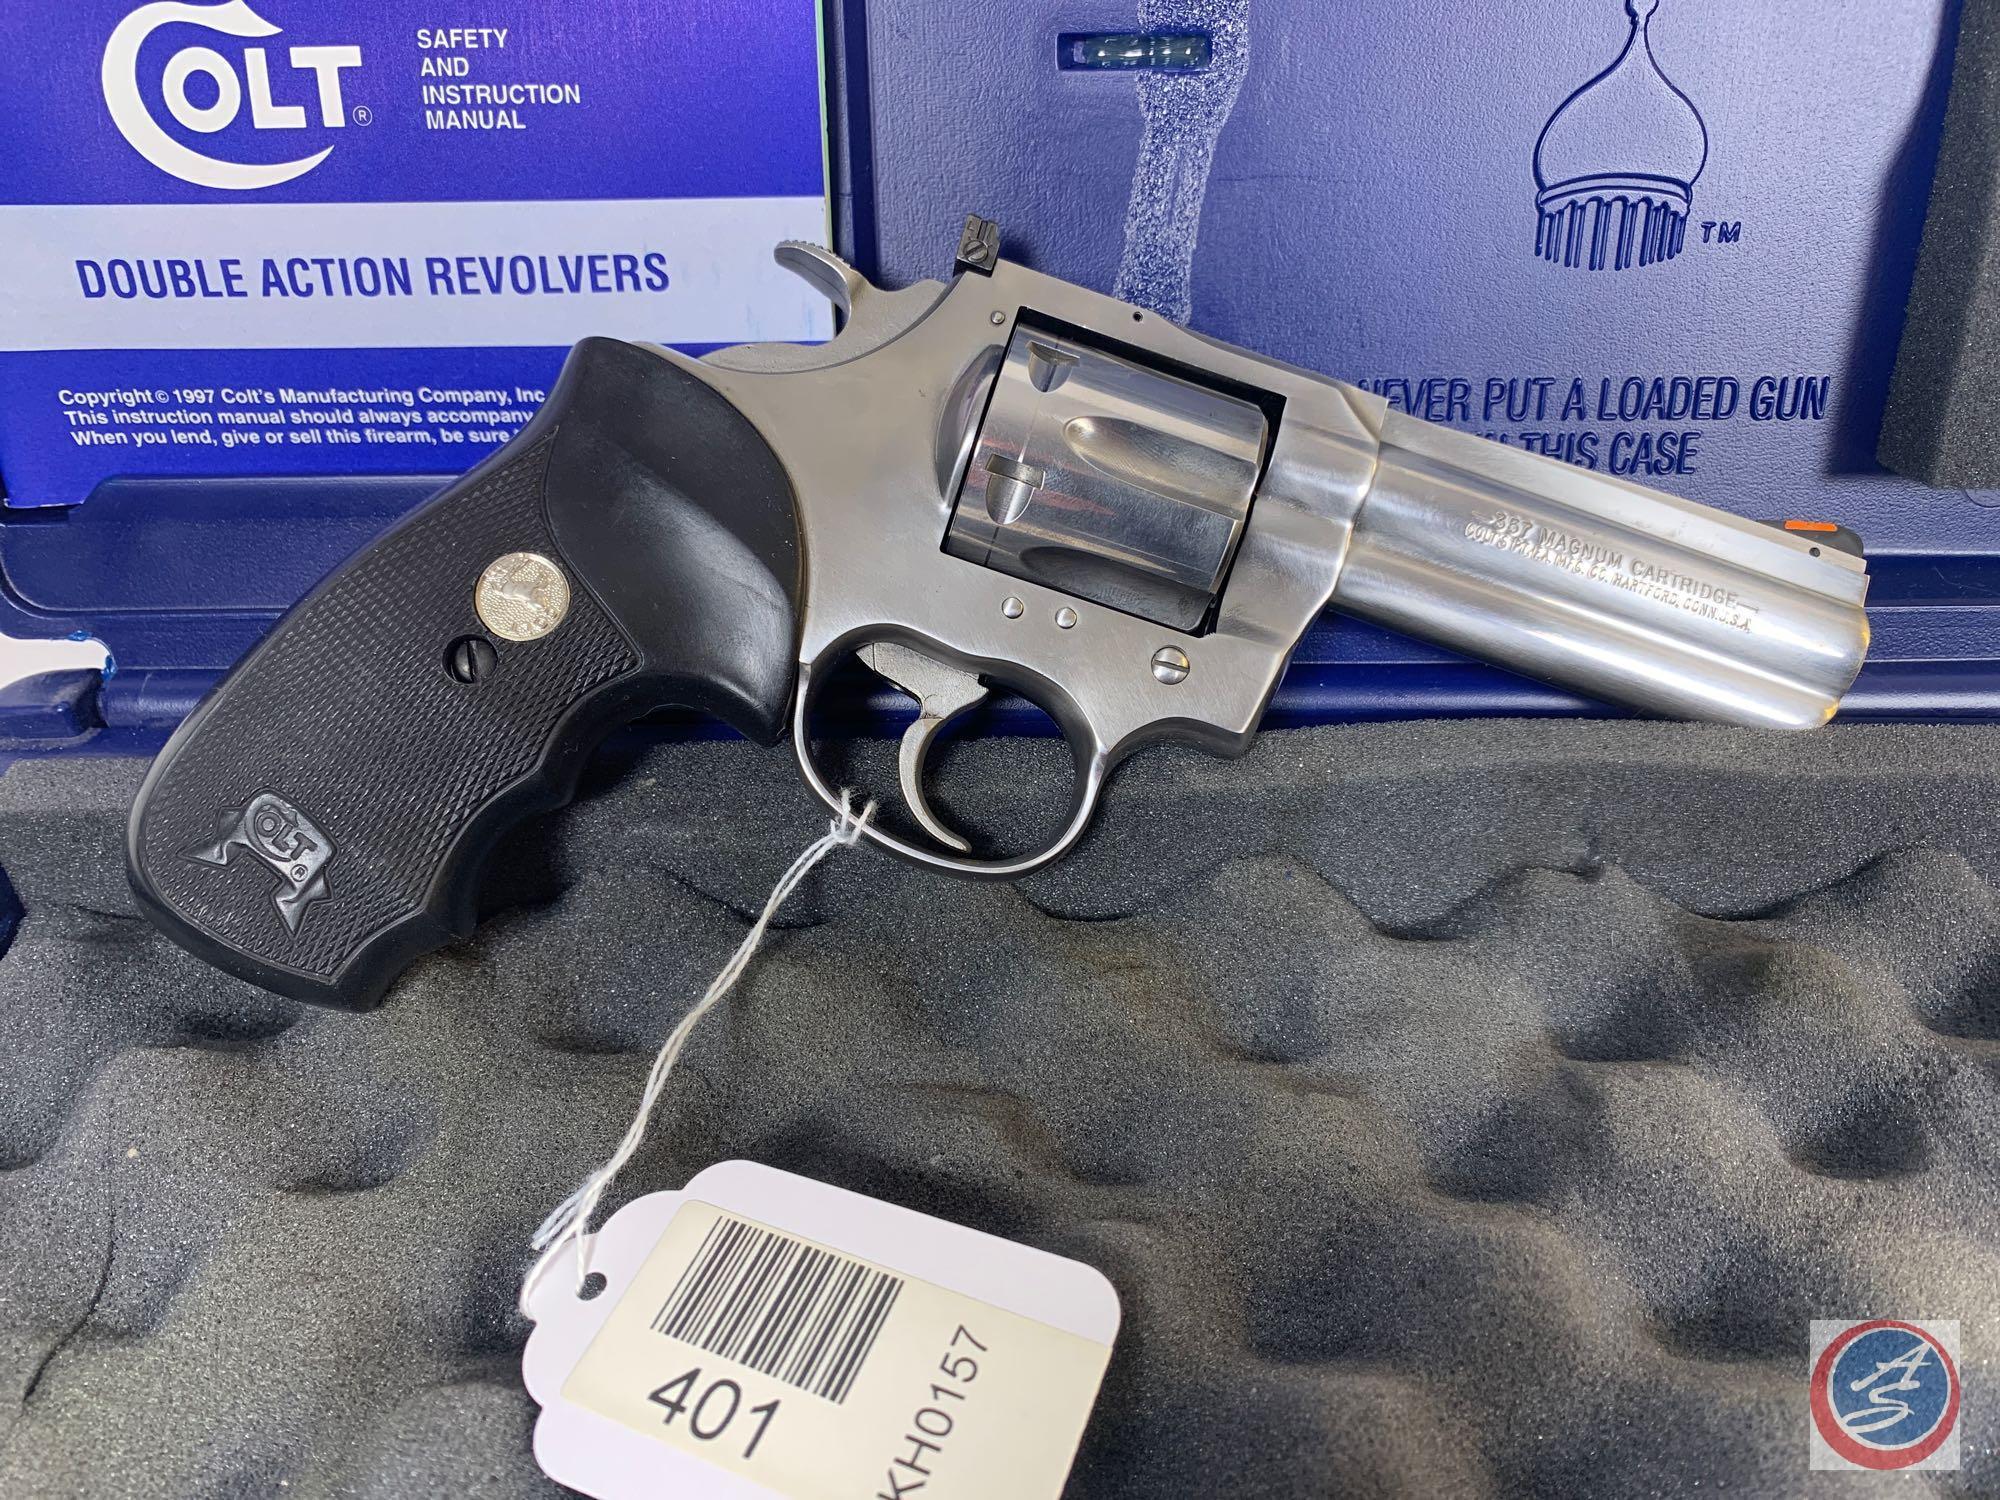 COLT Model King Cobra 357 Magnum Revolver Six Shot Stainless Steel Double Action Revolver with 4